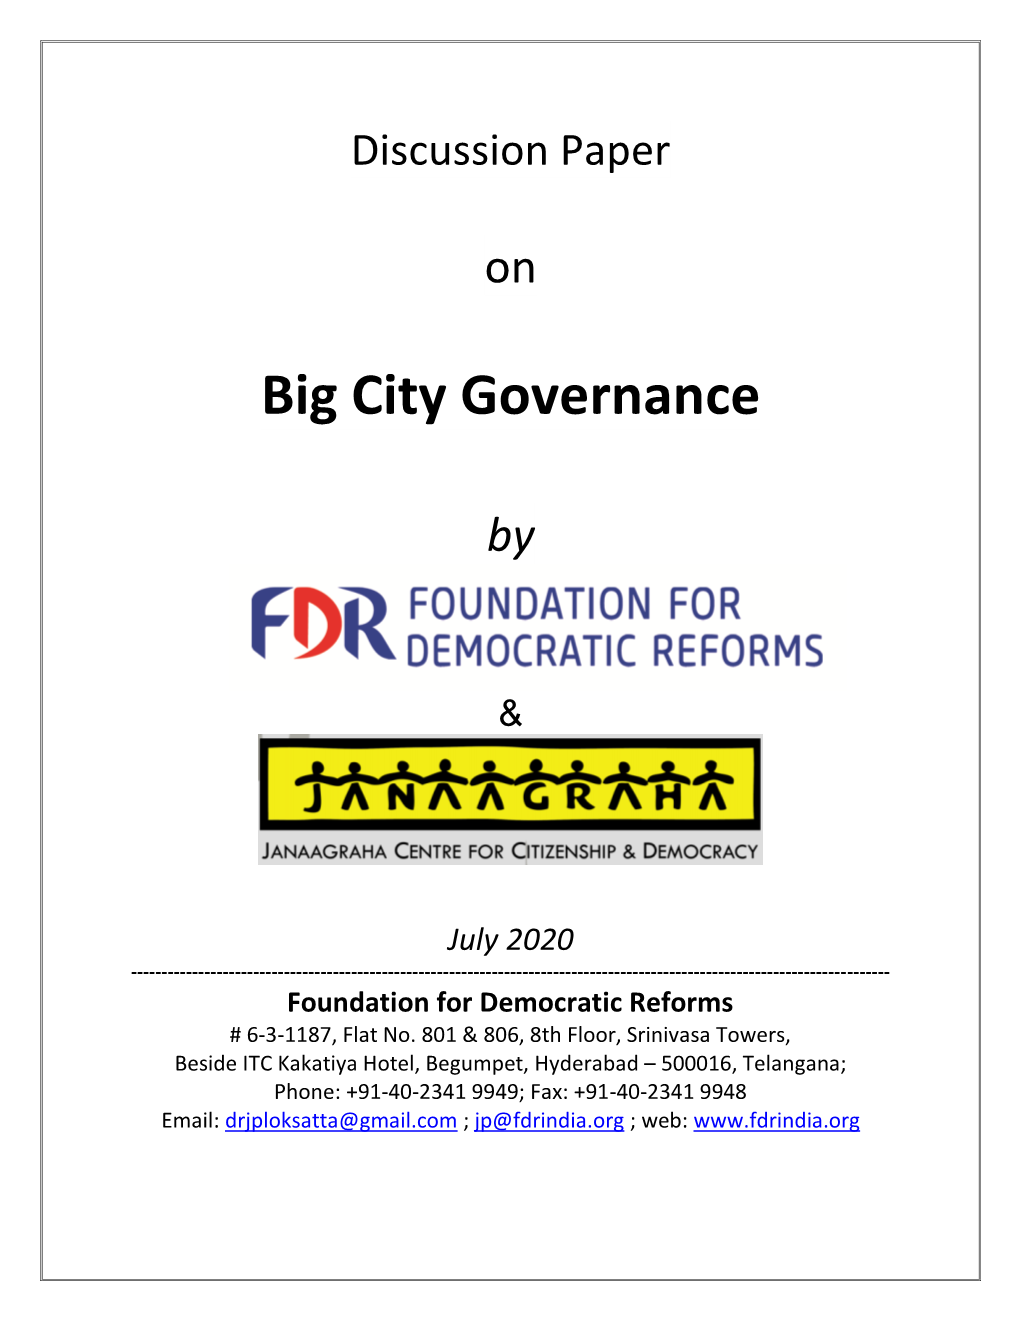 Discussion Paper on Big City Governance